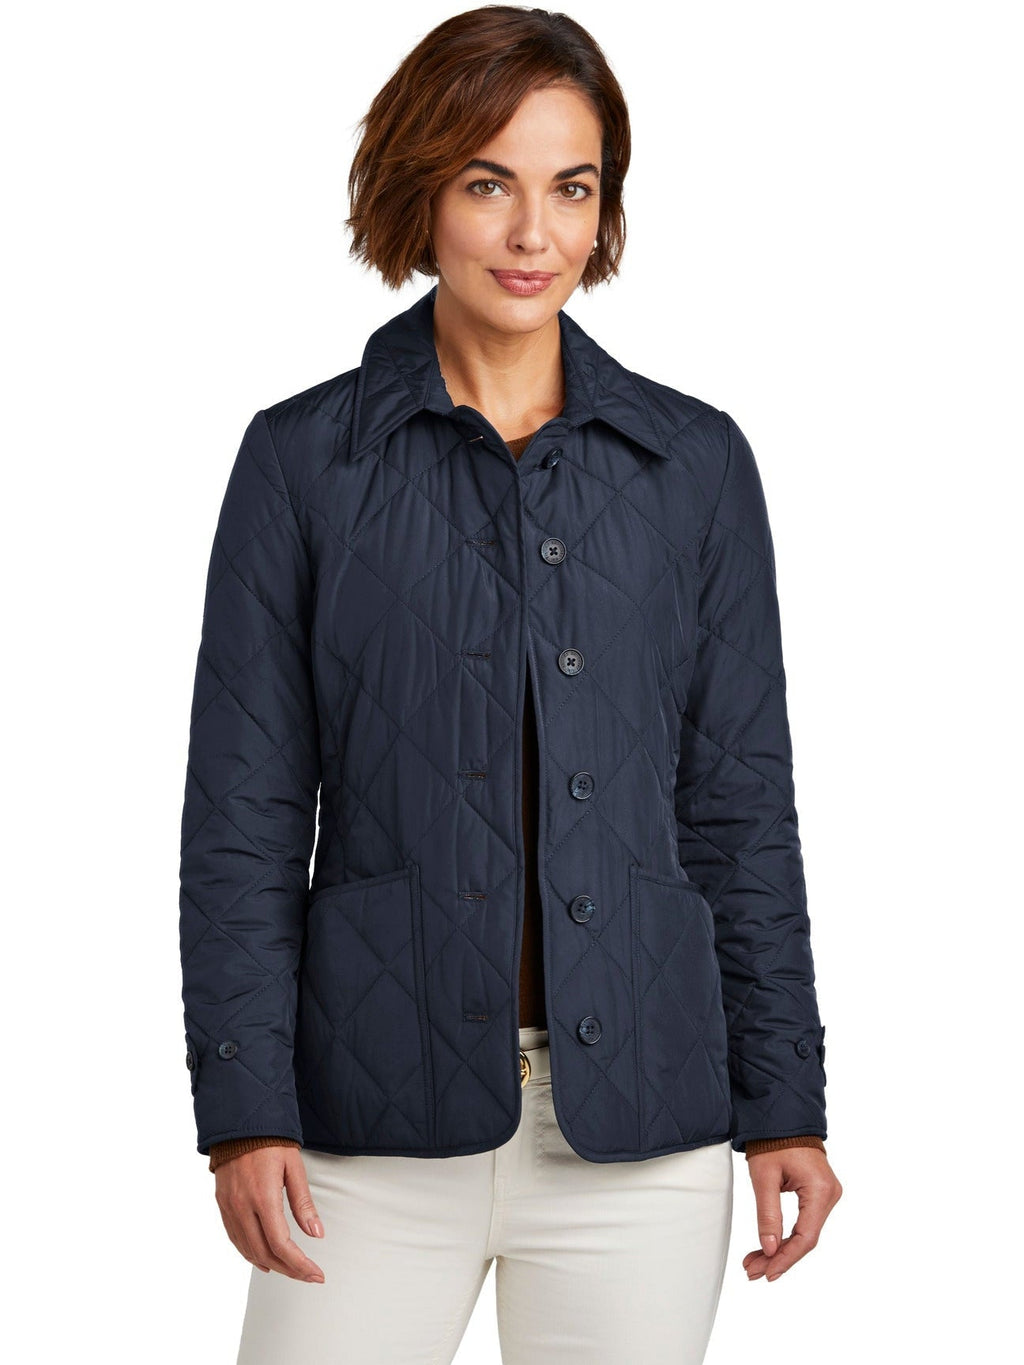 Brooks Brothers Women's Quilted Jacket With Custom Embroidery